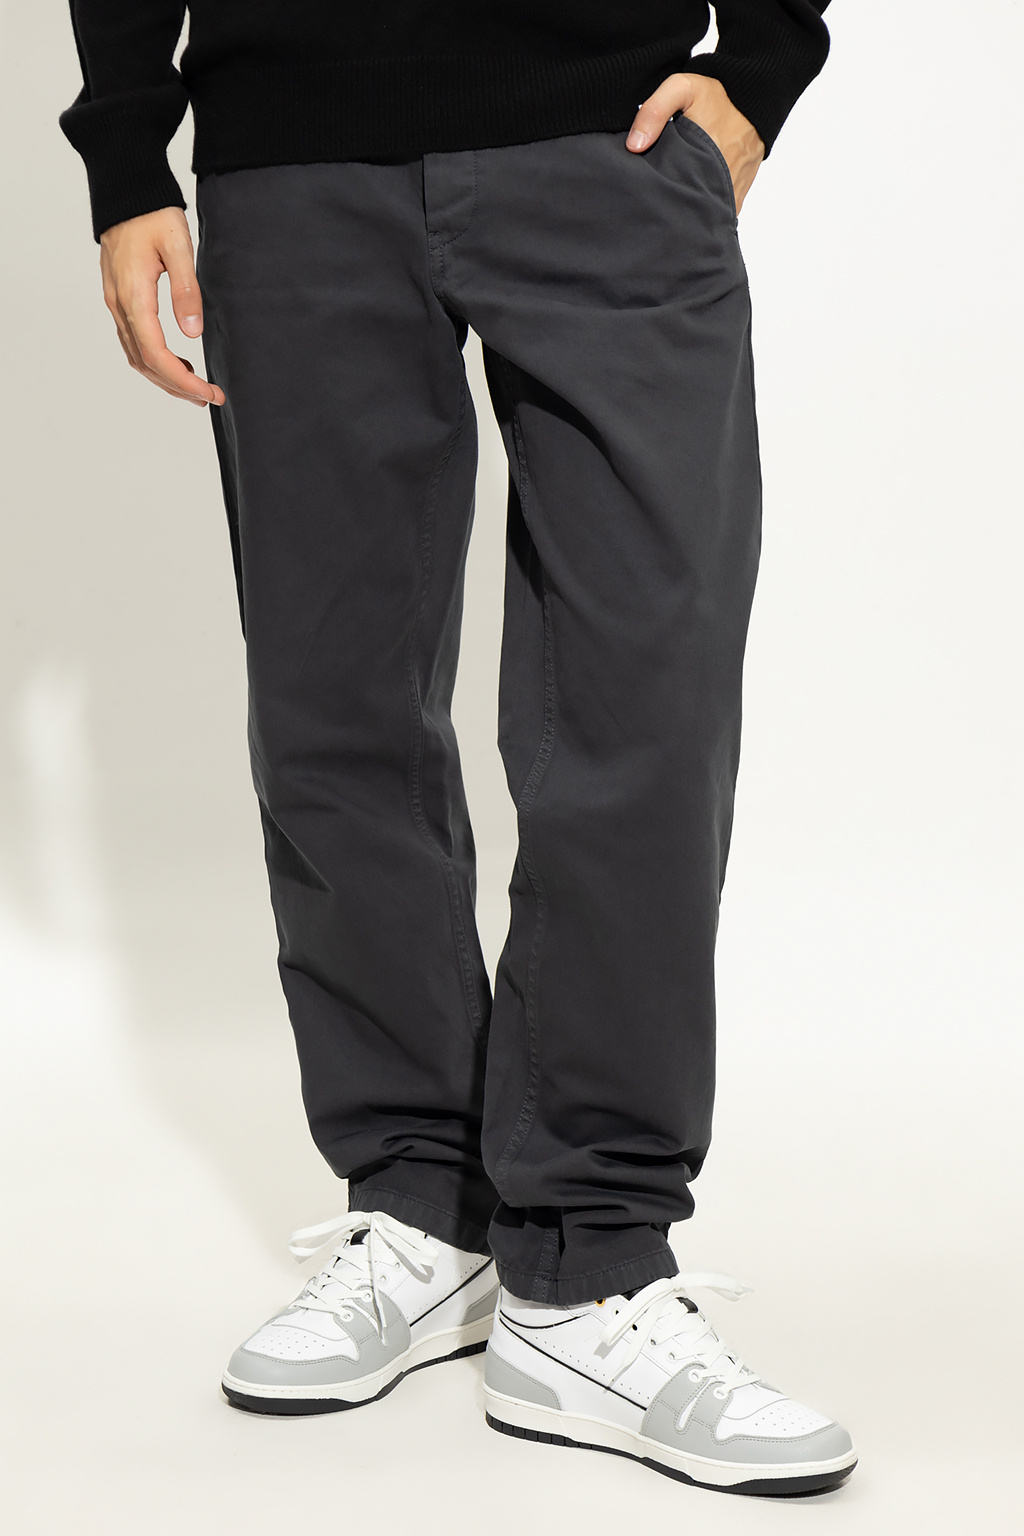 Norse Projects ‘Aros’ dormir trousers with tapered legs